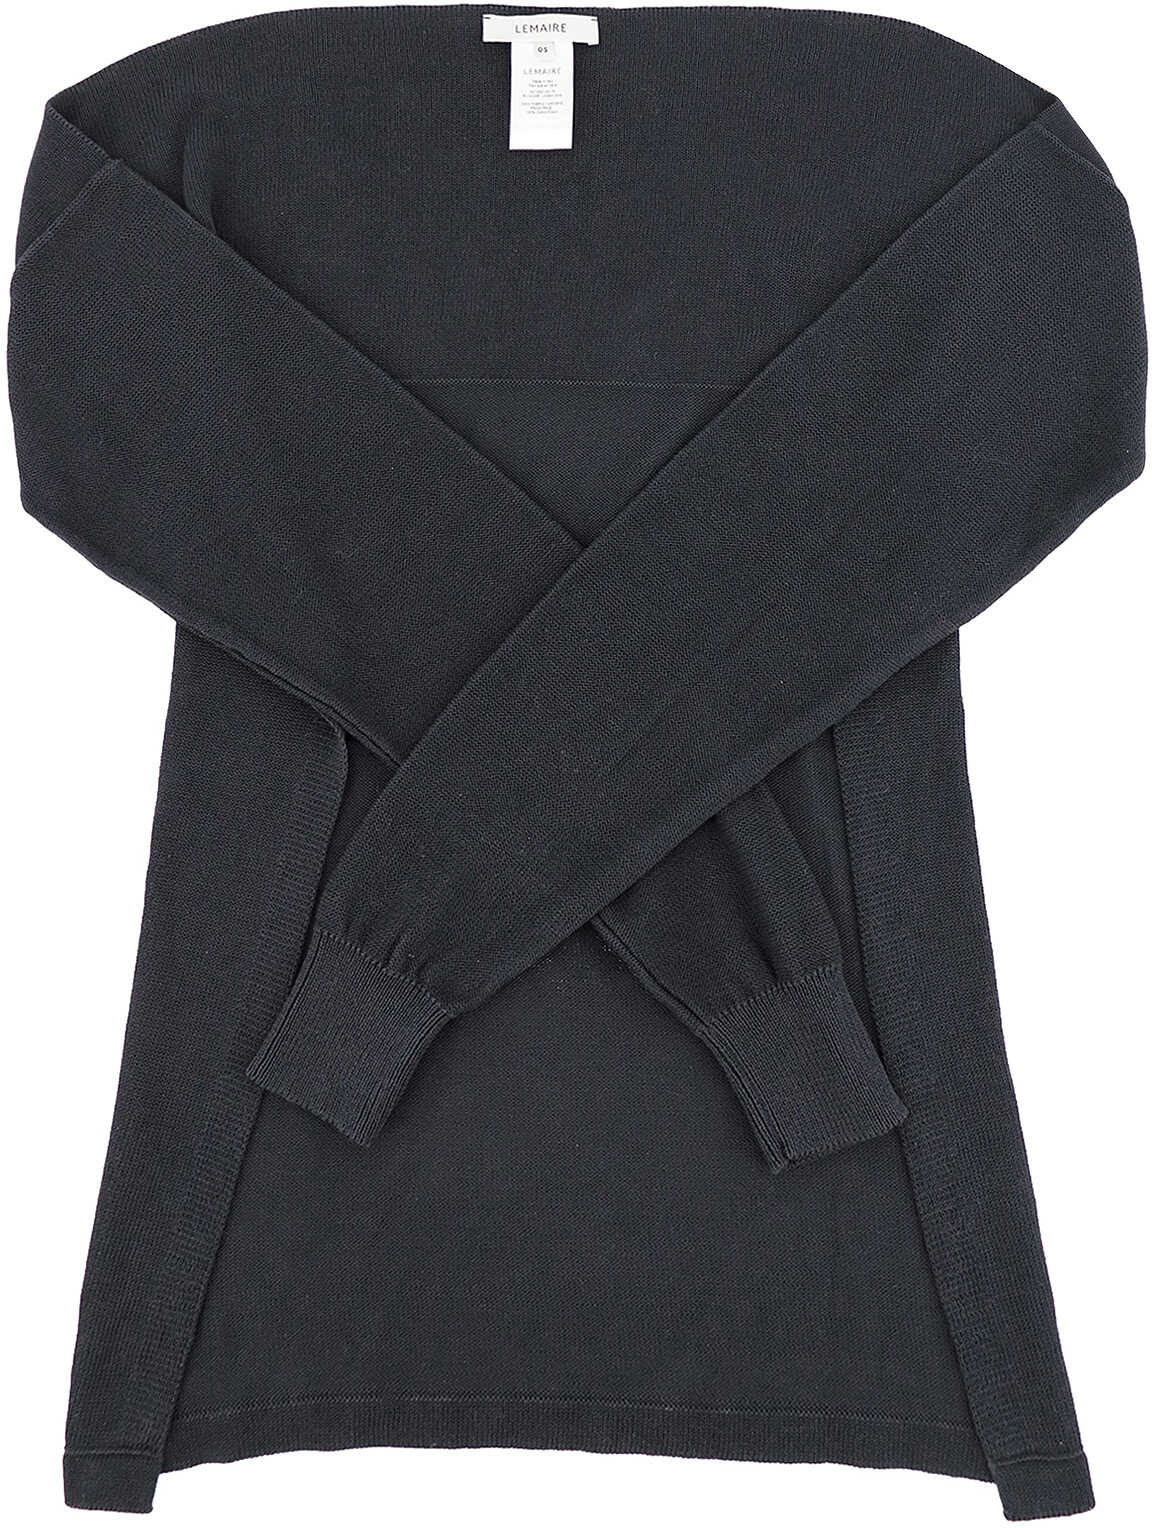 LEMAIRE Scarf Grey